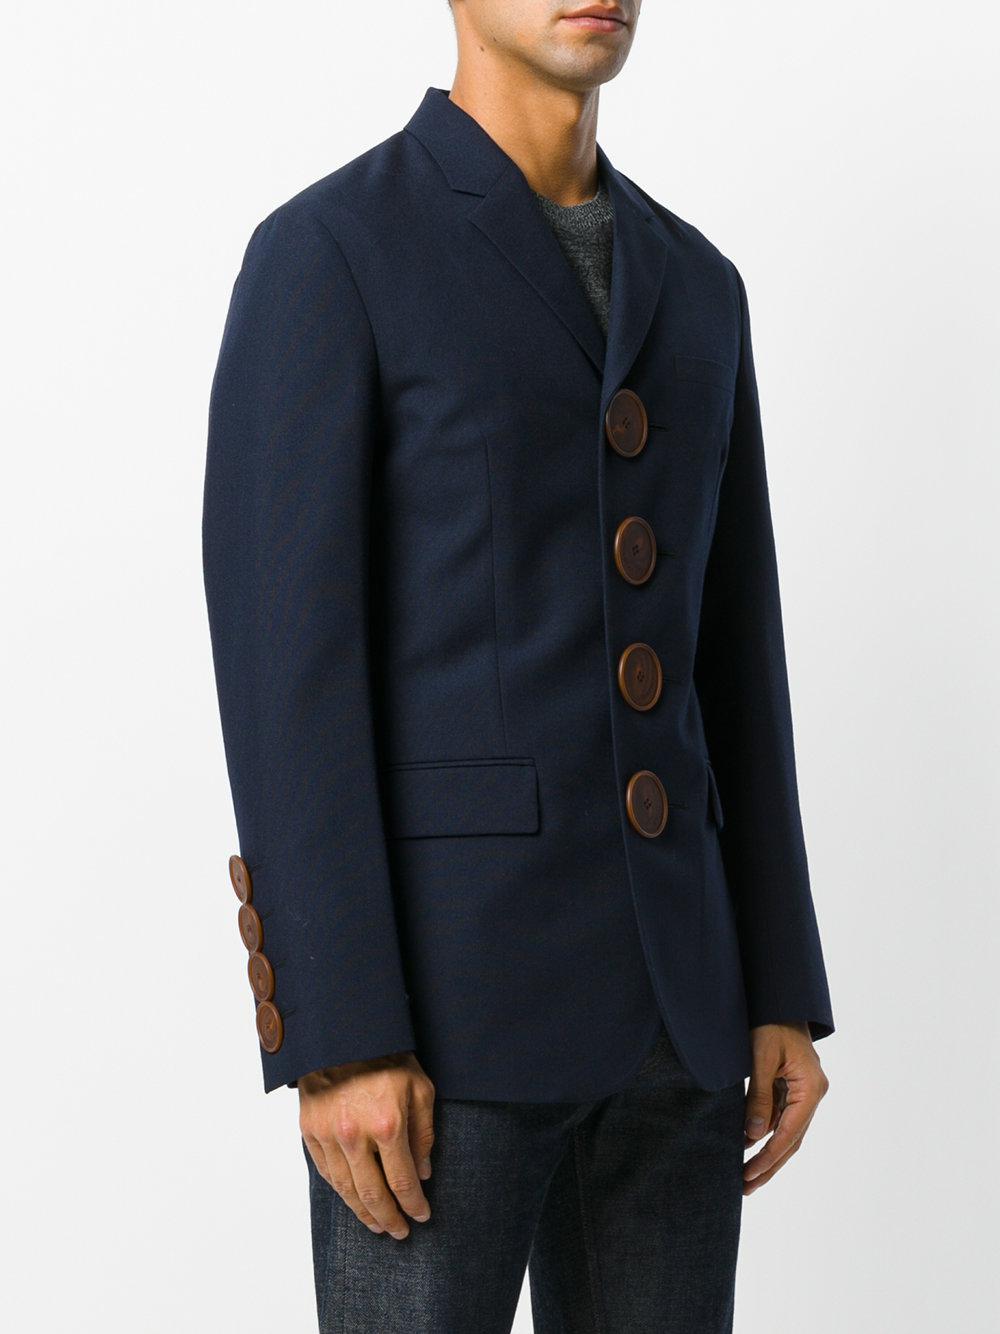 Lyst - Givenchy Oversized Button Jacket in Blue for Men